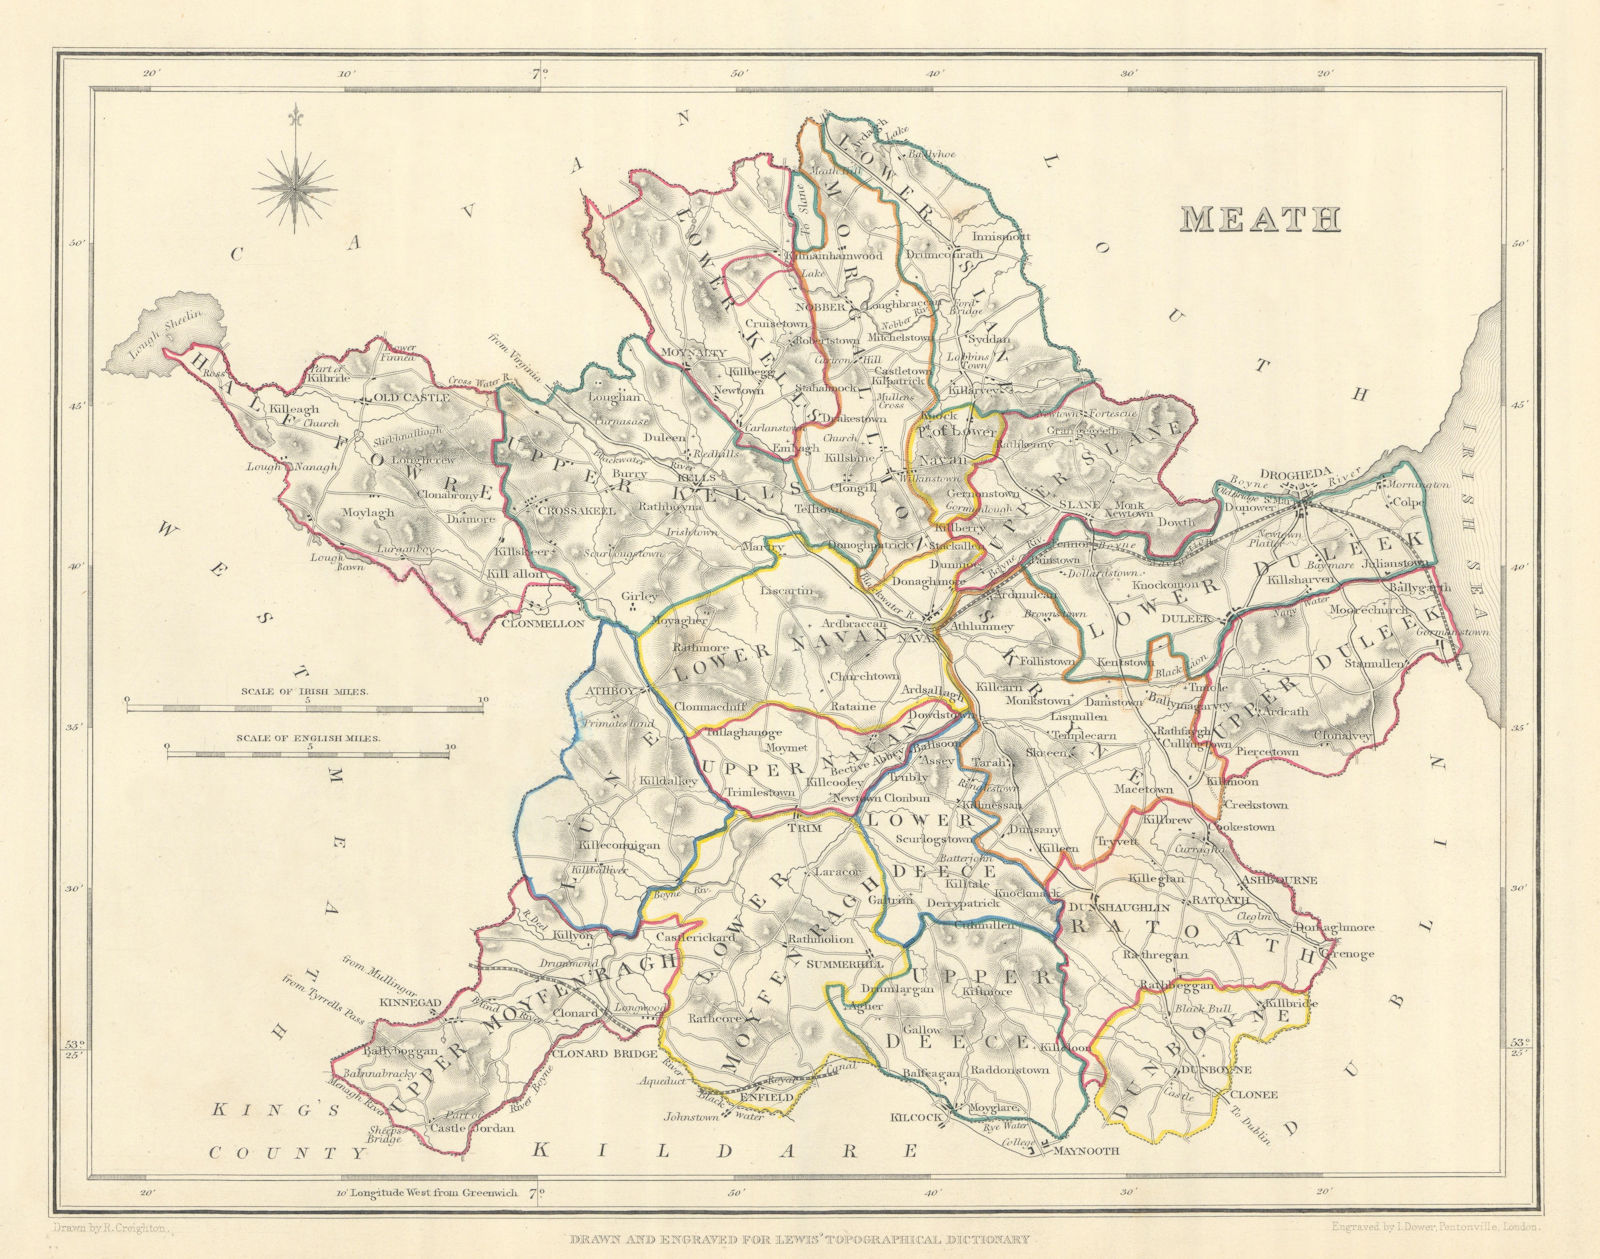 Associate Product COUNTY MEATH antique map for LEWIS by CREIGHTON & DOWER. Ireland 1850 old